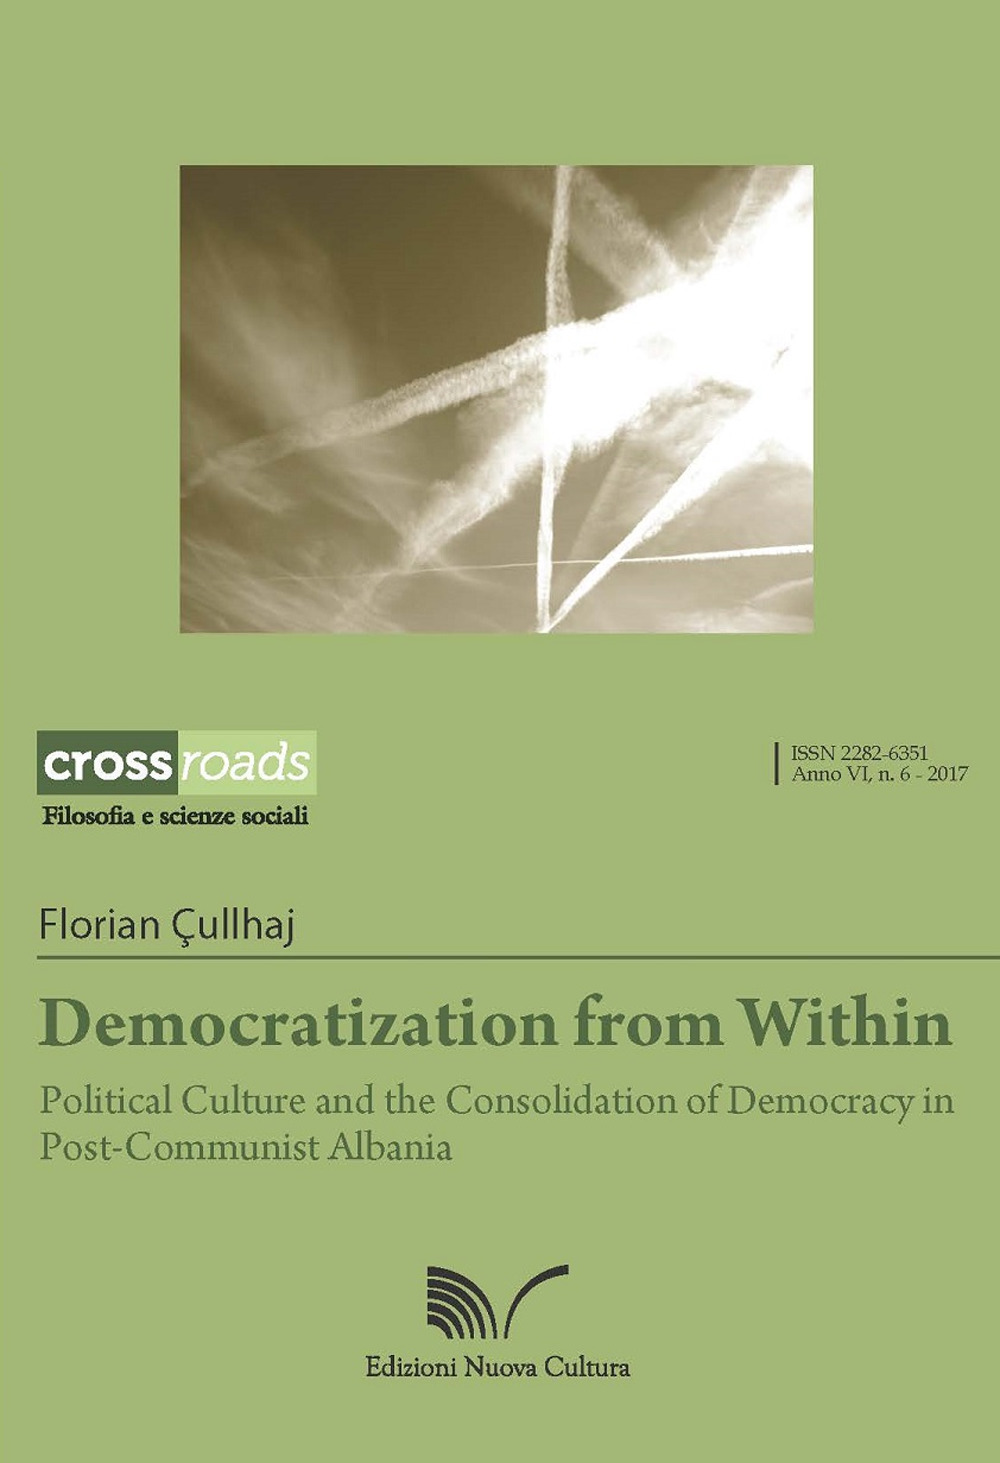 Democratization from within. Political culture and the consolidation of democracy in post-communist Albania